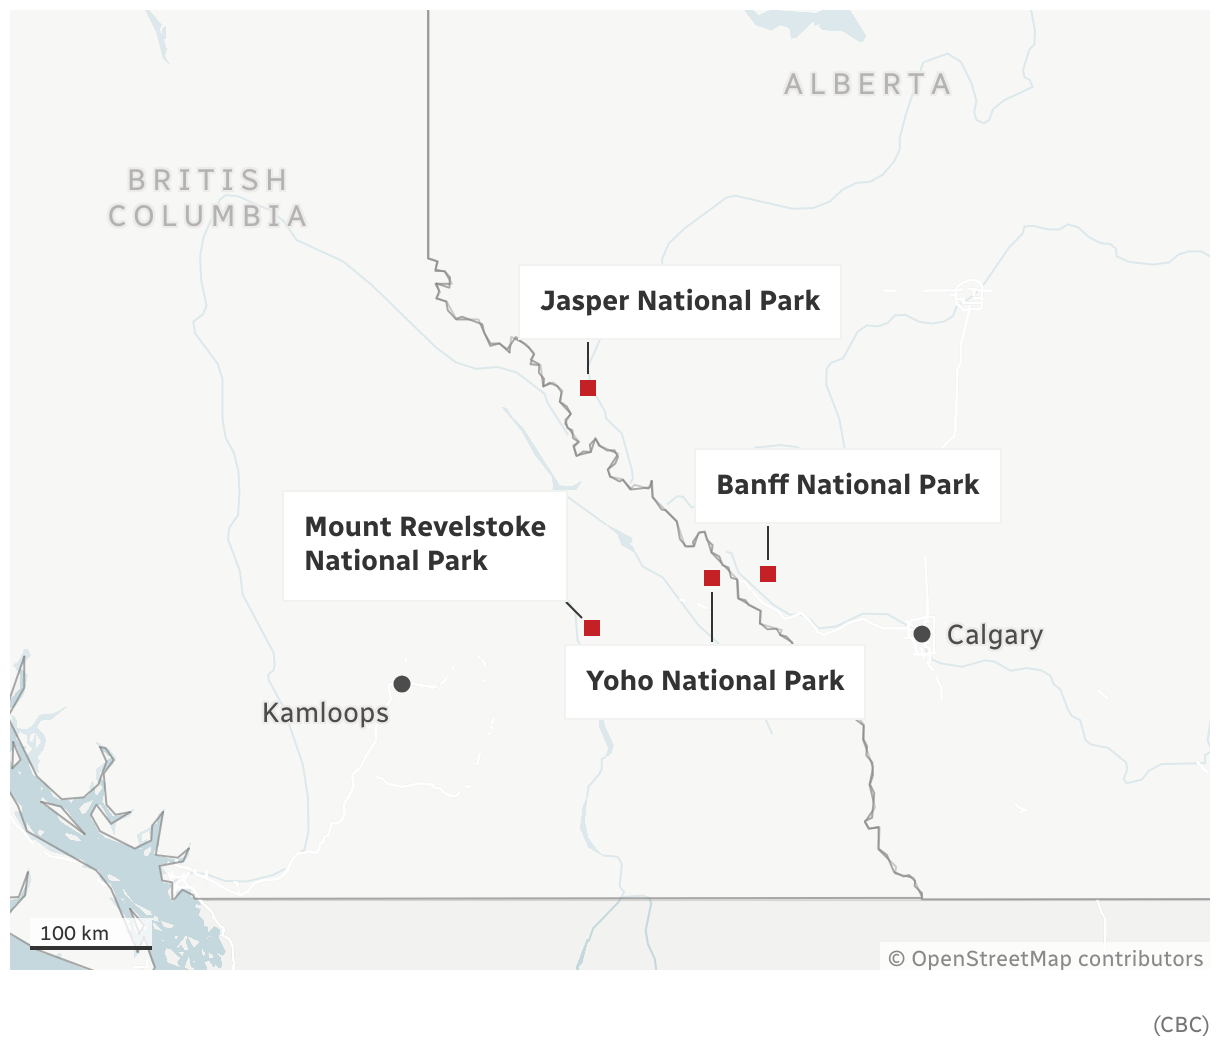 A locator map in grey-blue neutral tones mapping Calgary, Kamloops and four national parks: Jasper National Park, Banff National Park, Yoho National Park and Mount Revelstoke National Park.